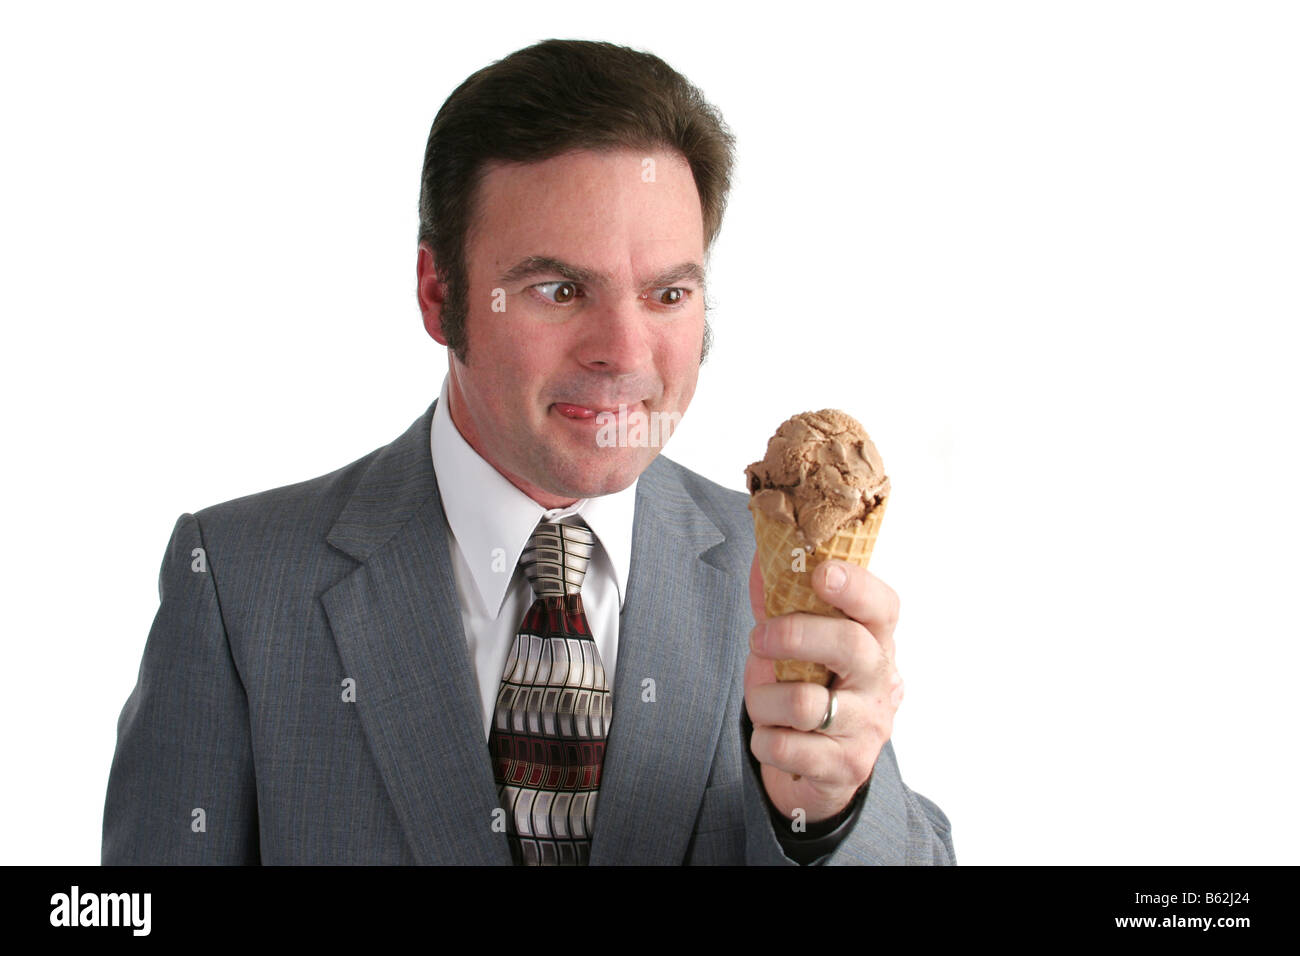 A businessman drooling and looking at a chocolate ice cream cone Stock Photo